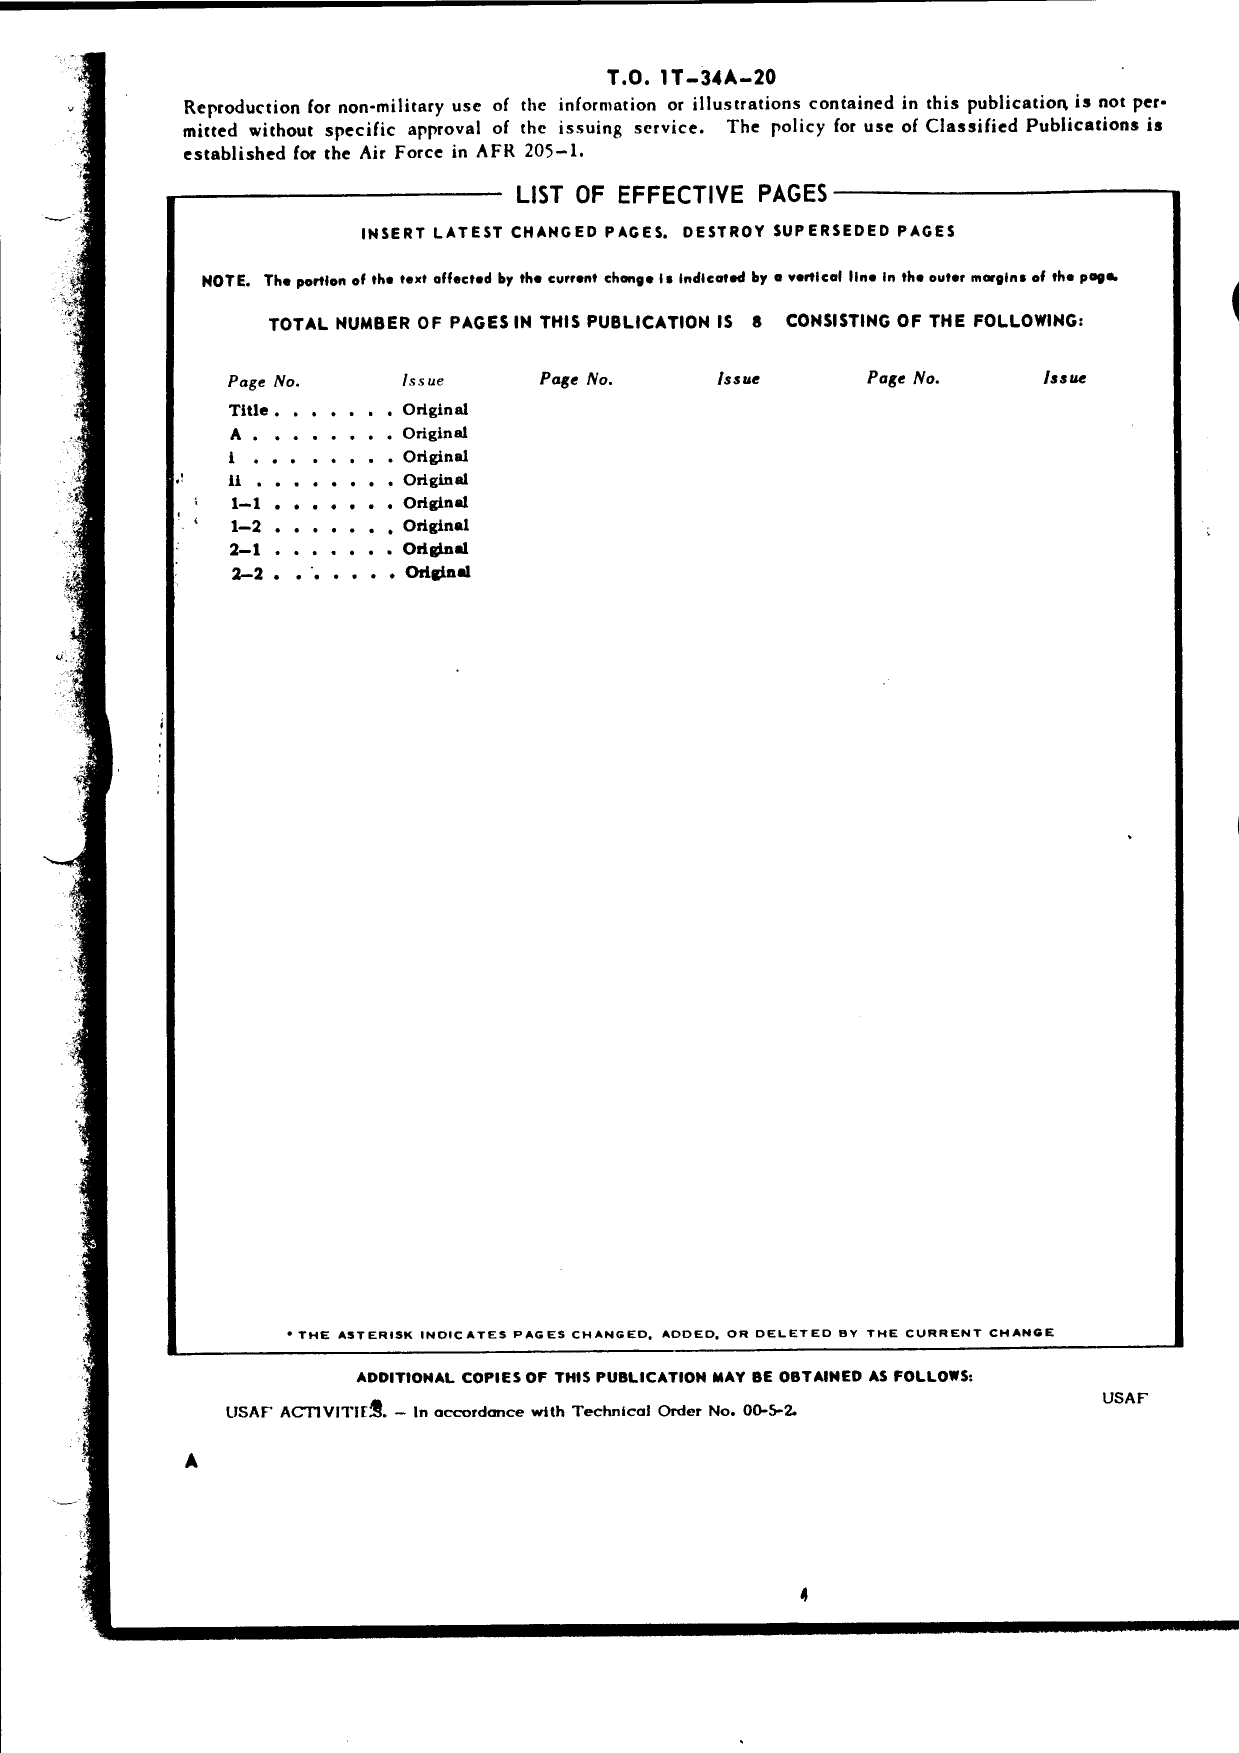 Sample page 2 from AirCorps Library document: Product Improvement Digest for T-34A Aircraft